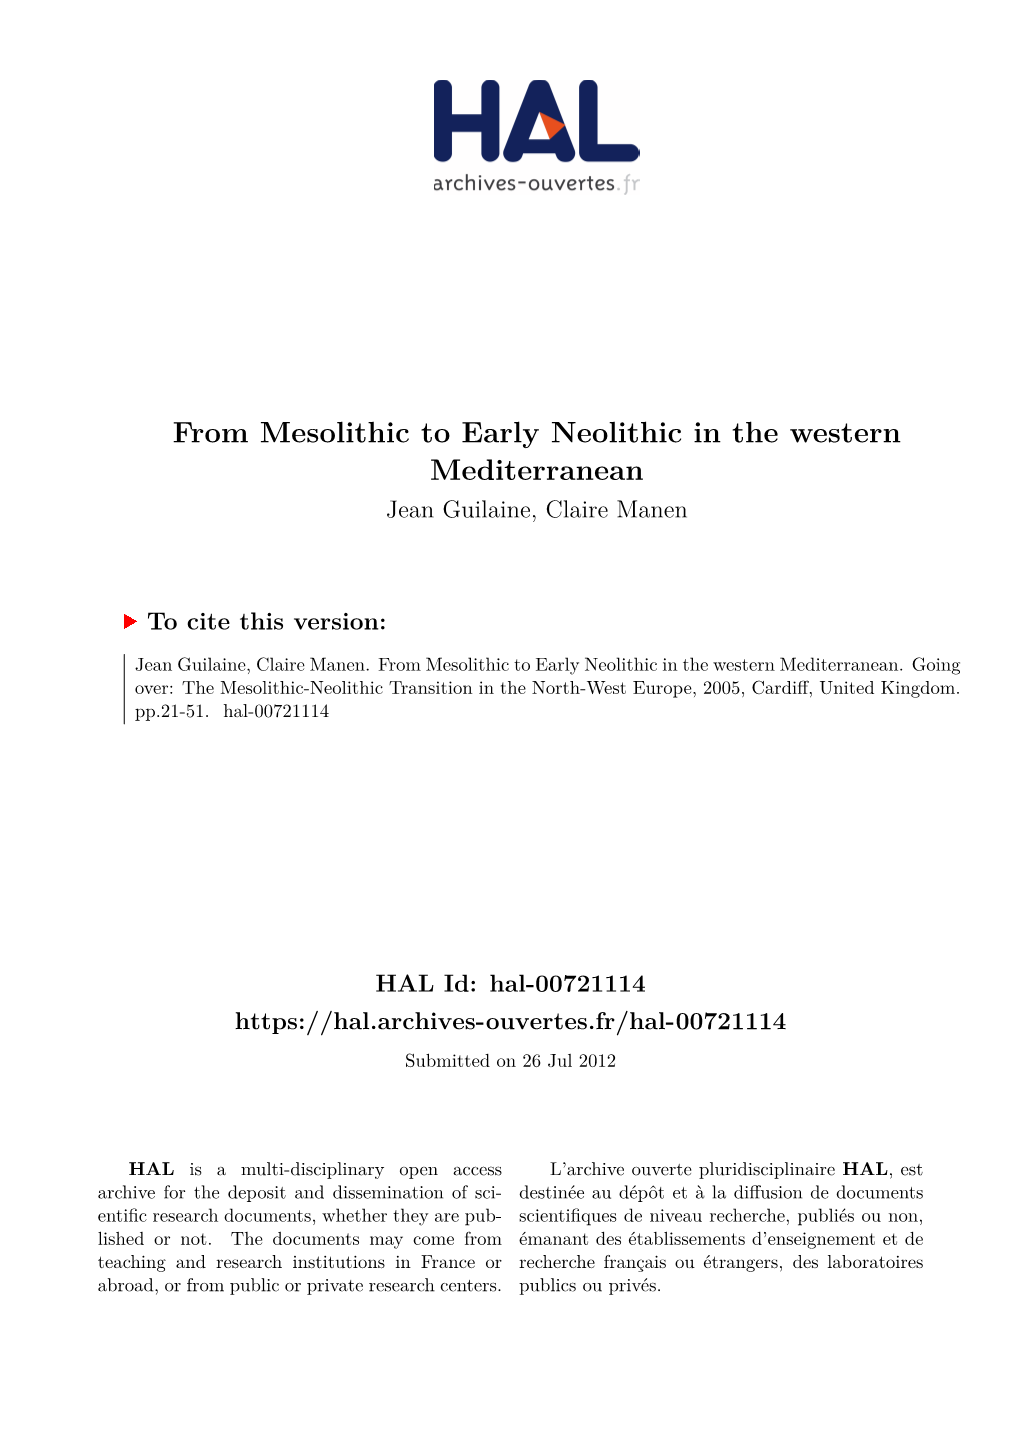 From Mesolithic to Early Neolithic in the Western Mediterranean Jean Guilaine, Claire Manen